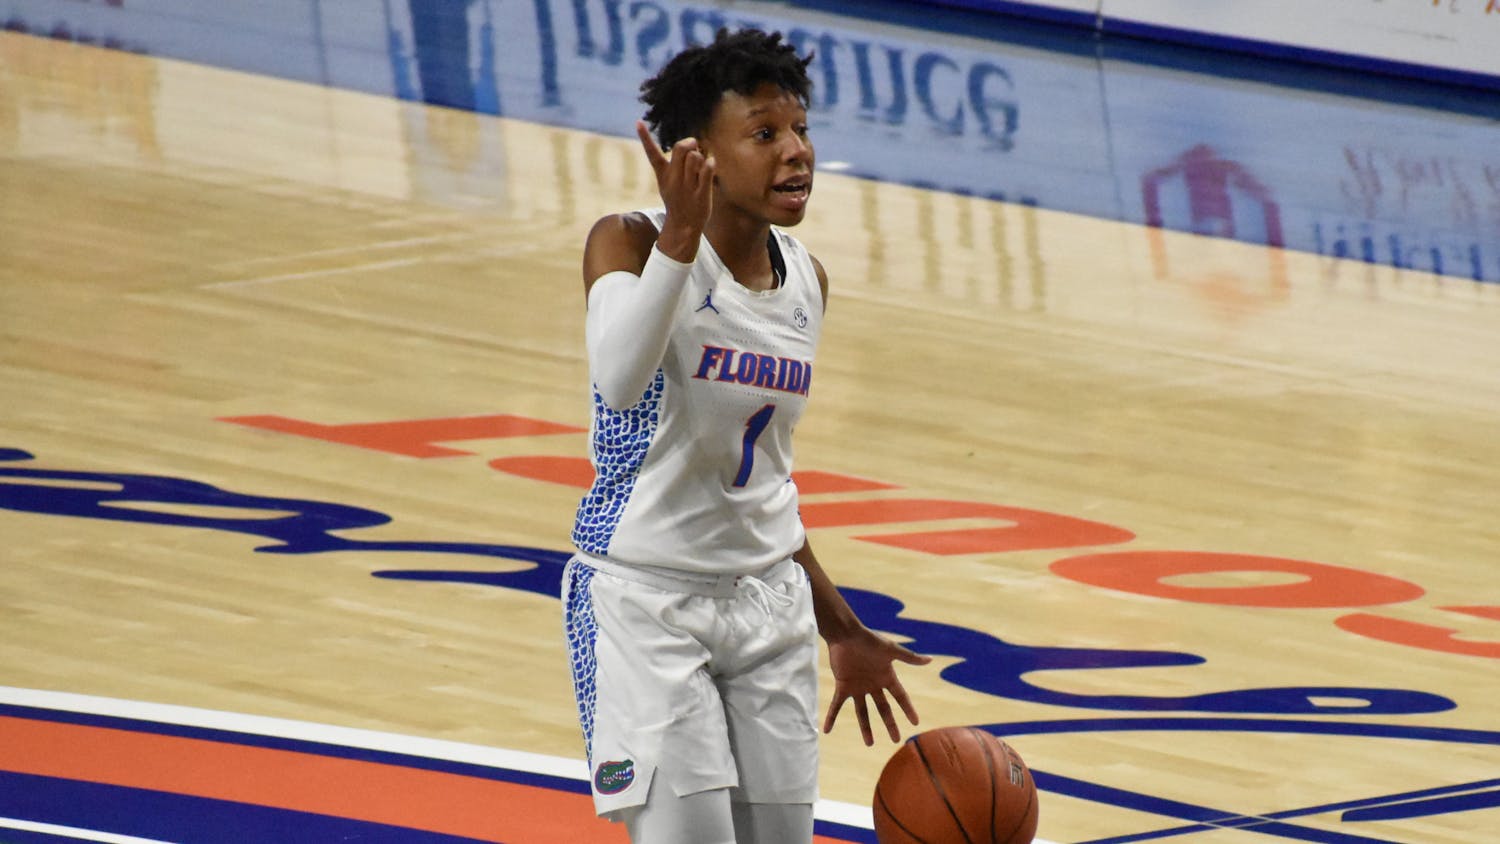 Florida guard Kiara Smith (pictured) and the Gators women's basketball team released its 2021-22 non-conference schedule Tuesday.